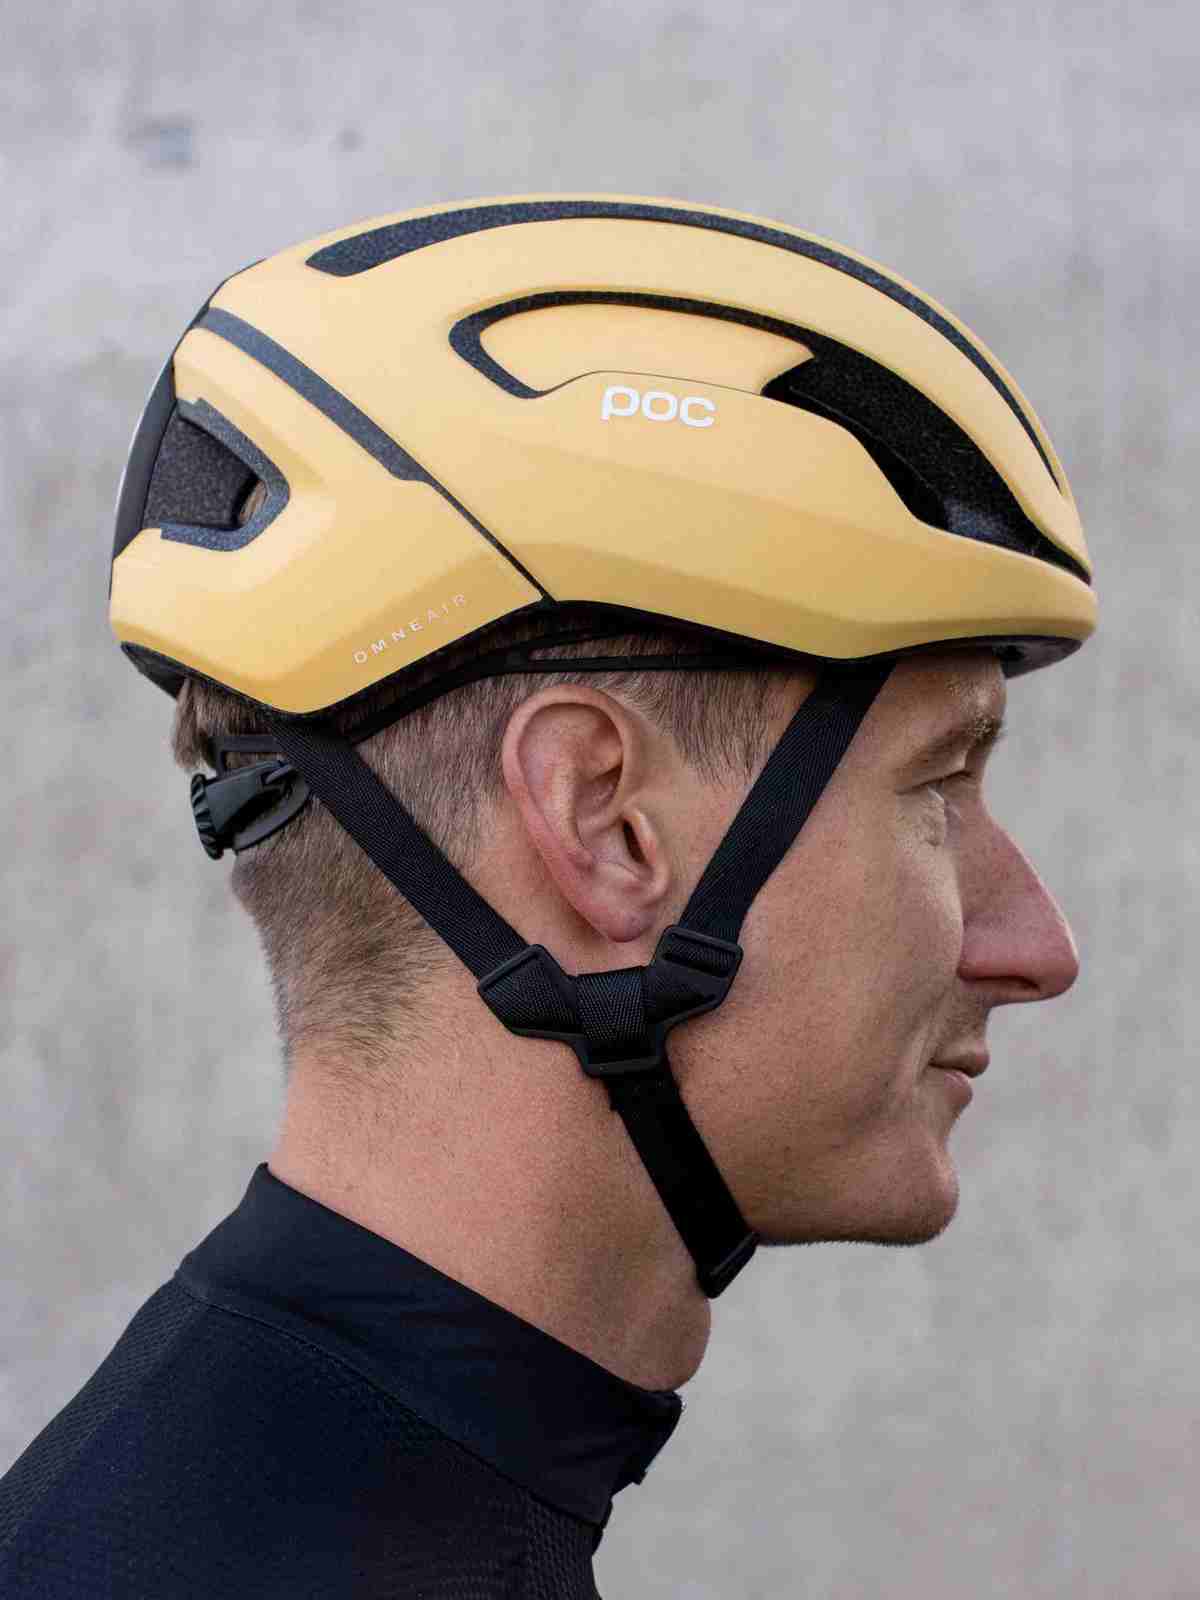 Kask Rowerowy POC OMNE AIR SPIN